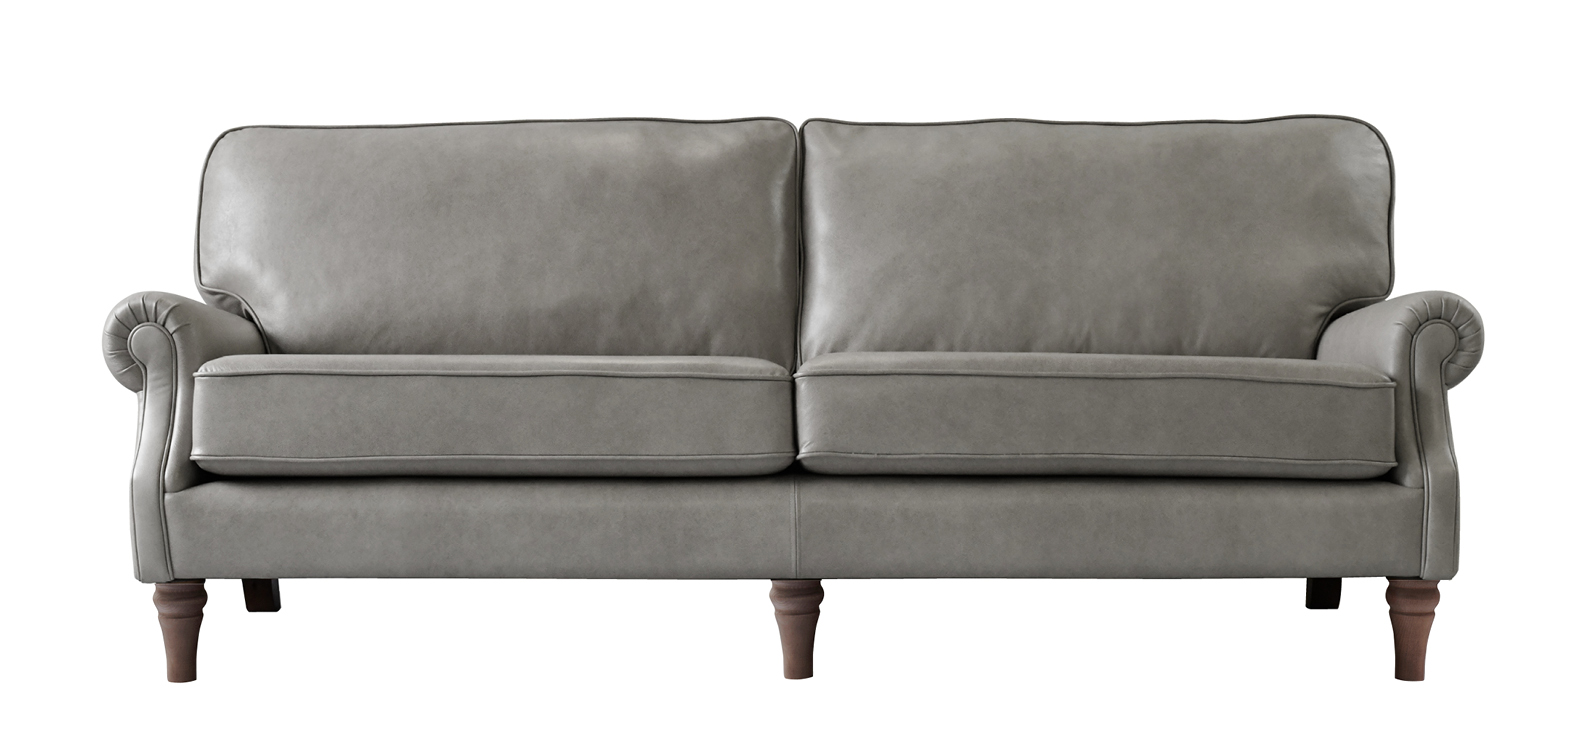 Taylor 4 Seater Leather Sofa